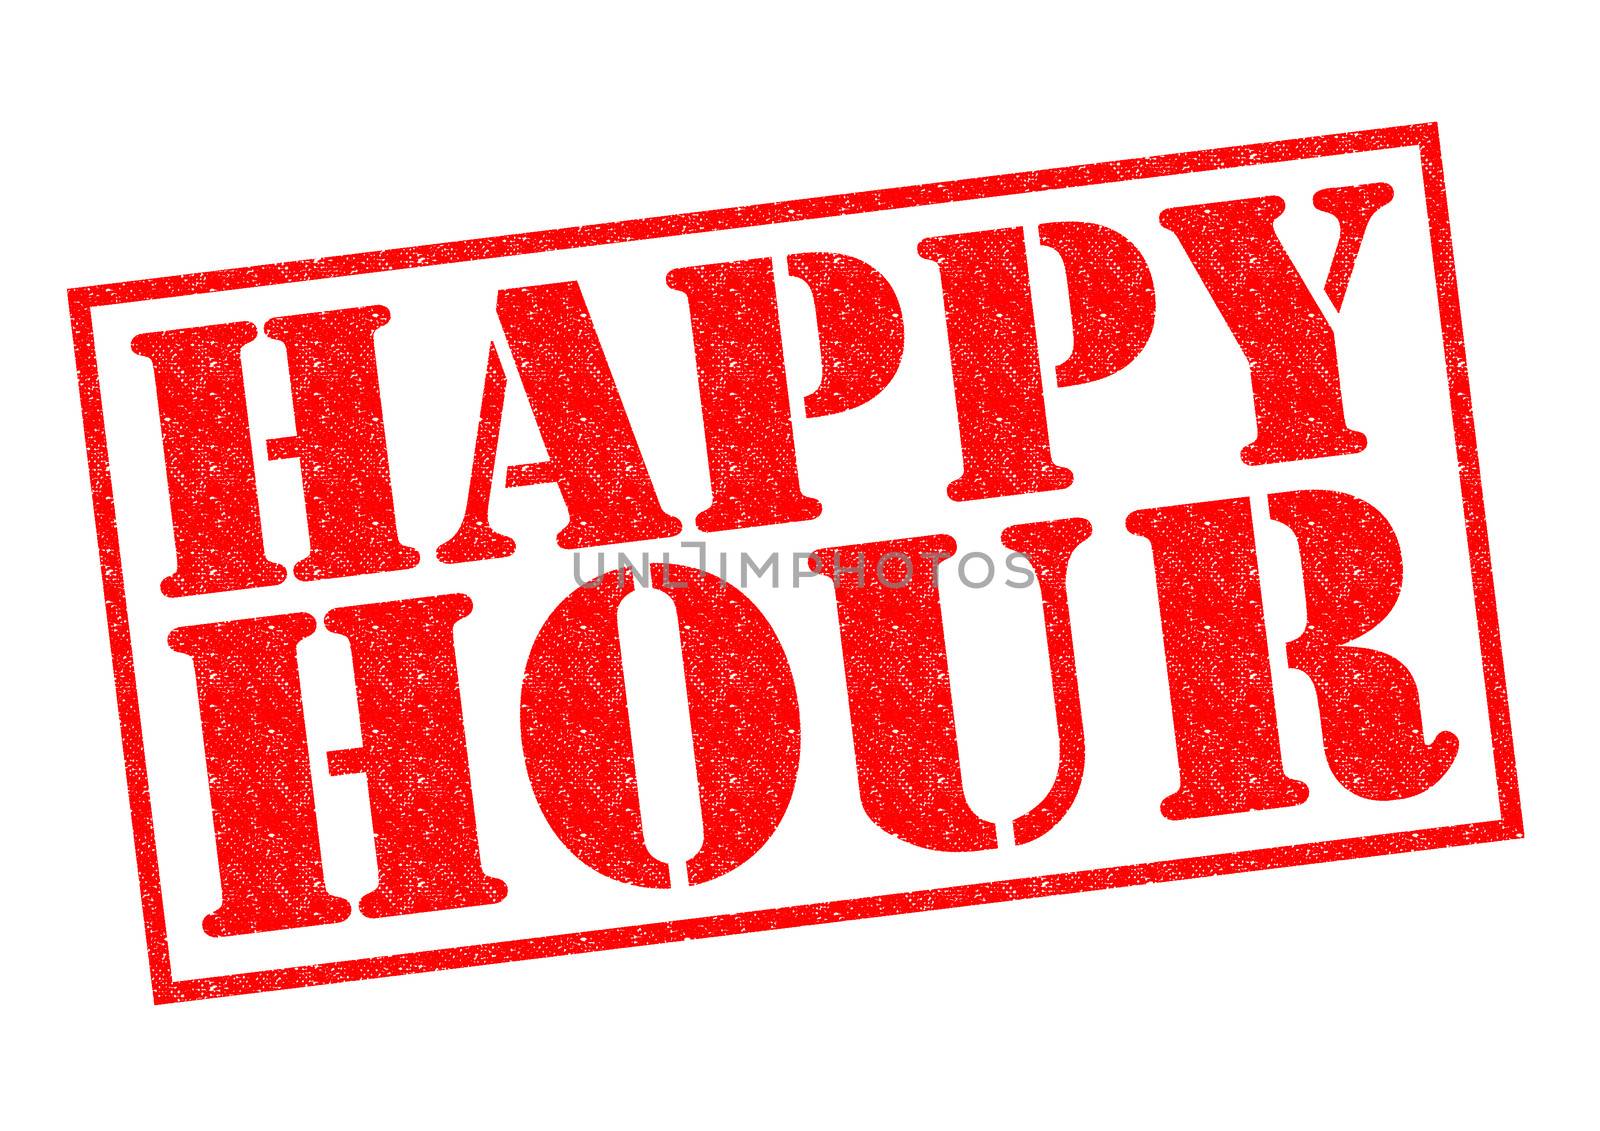 HAPPY HOUR red Rubber Stamp over a white background.